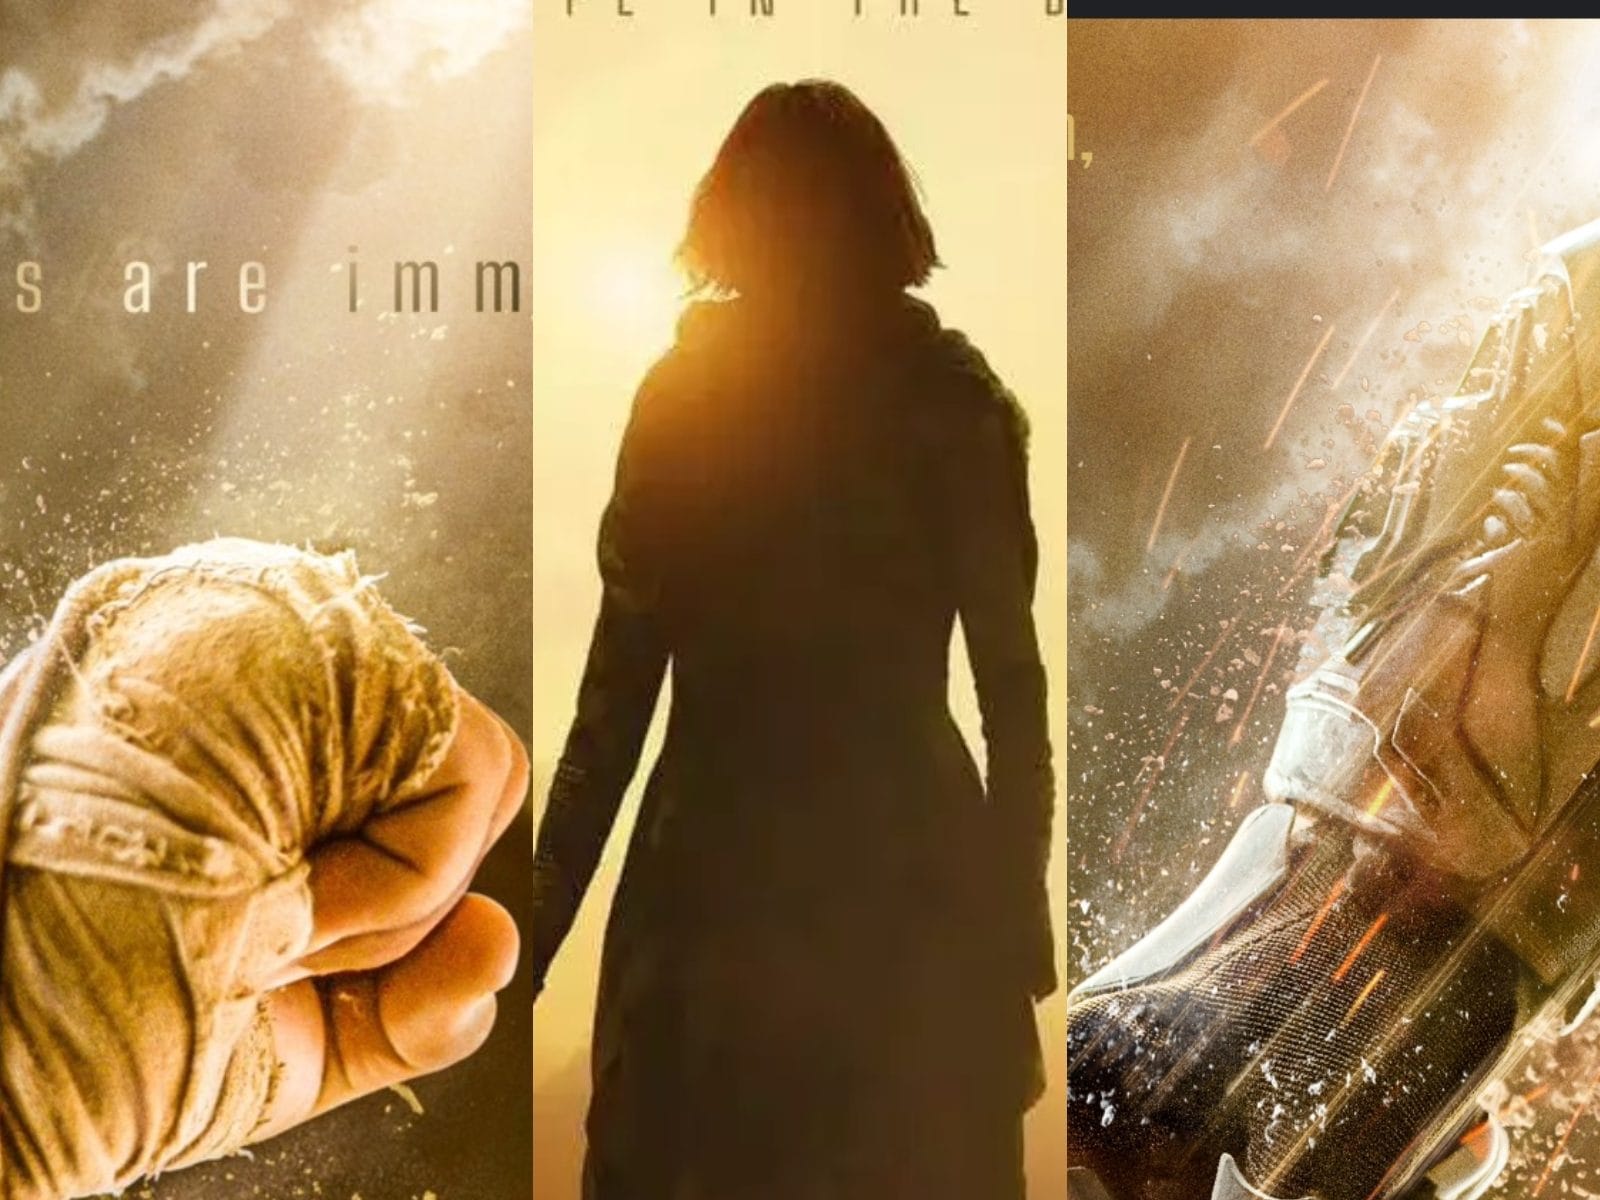 Amitabh Bachchan, Prabhas And Deepika Padukone Starrer Sci-Fi Film Project K Will Be Released In Two Parts